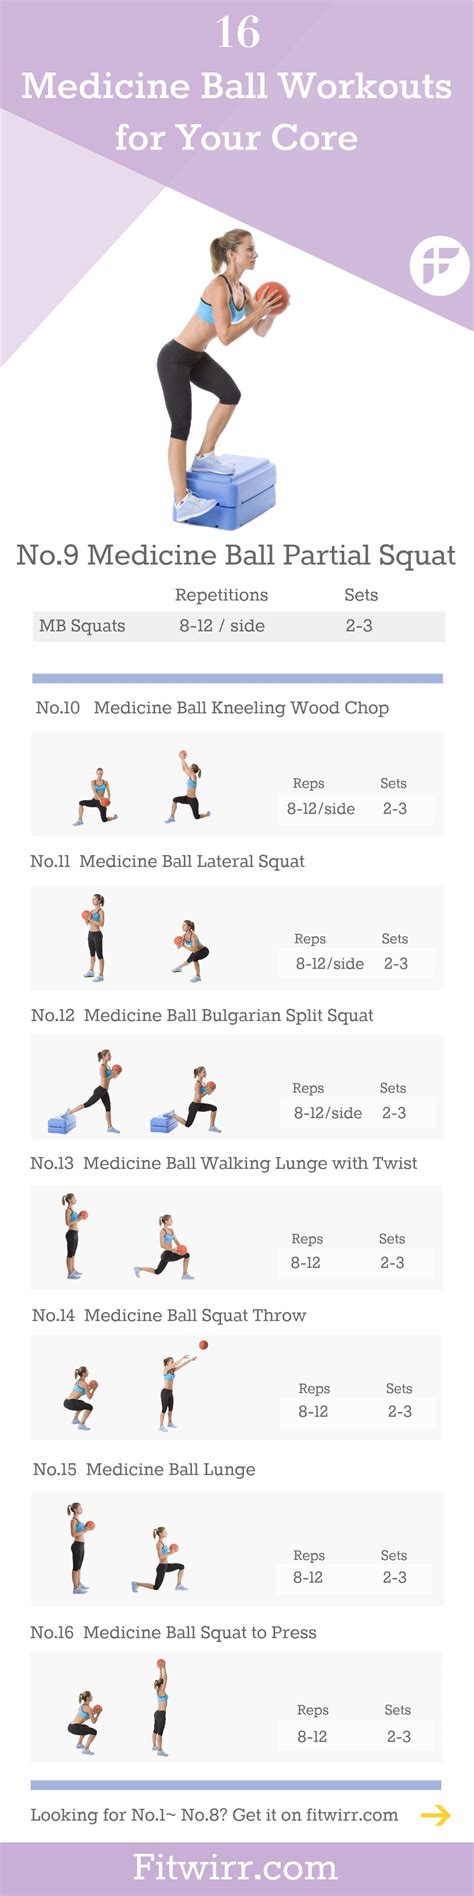 Gym Ball Exercises Pdf Download Exercise Ball Workouts